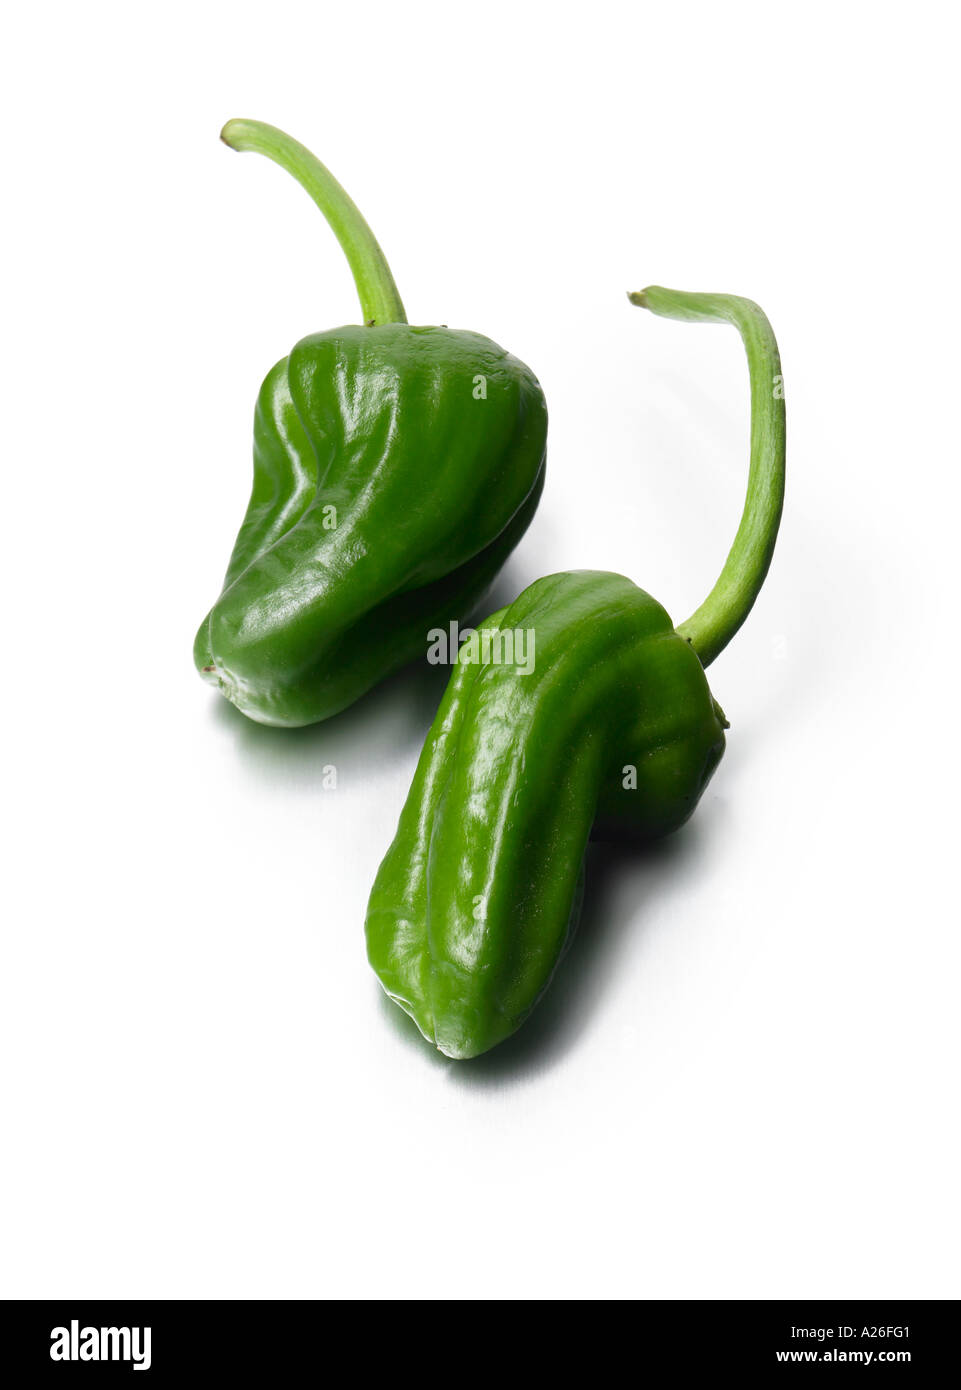 Padron peppers food, pepper, padron, vegetable, green, healthy, fresh, raw, organic, ingredient, vegetarian, spanish, cooking, chili, cuisine, Stock Photo